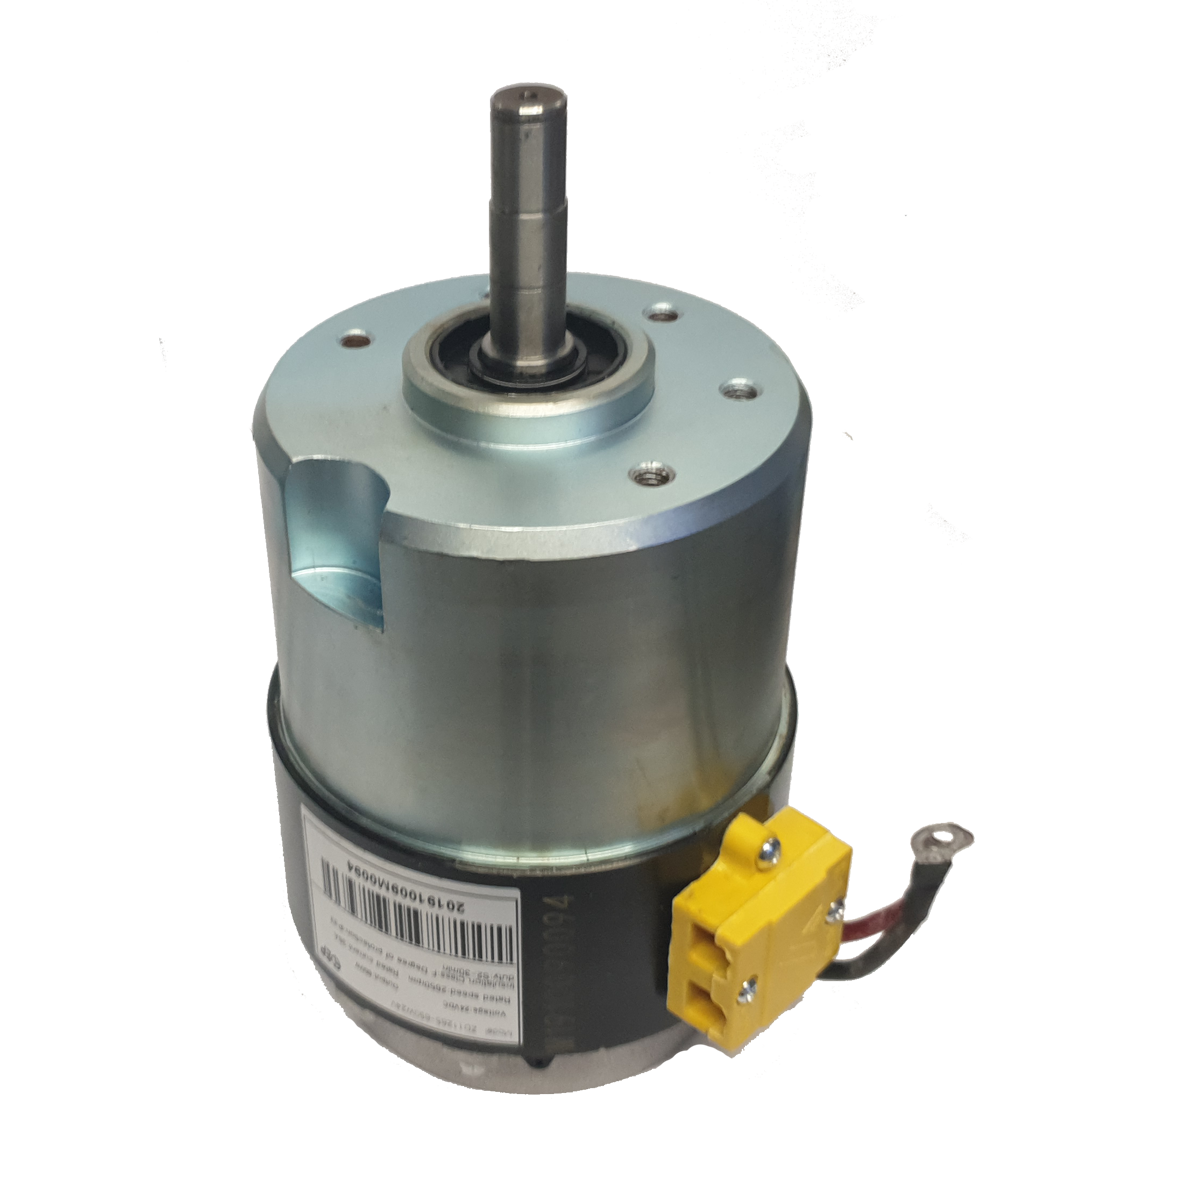 EP Equipment EPT20-18EHJ Electric Drive Motor 1115-250000-00